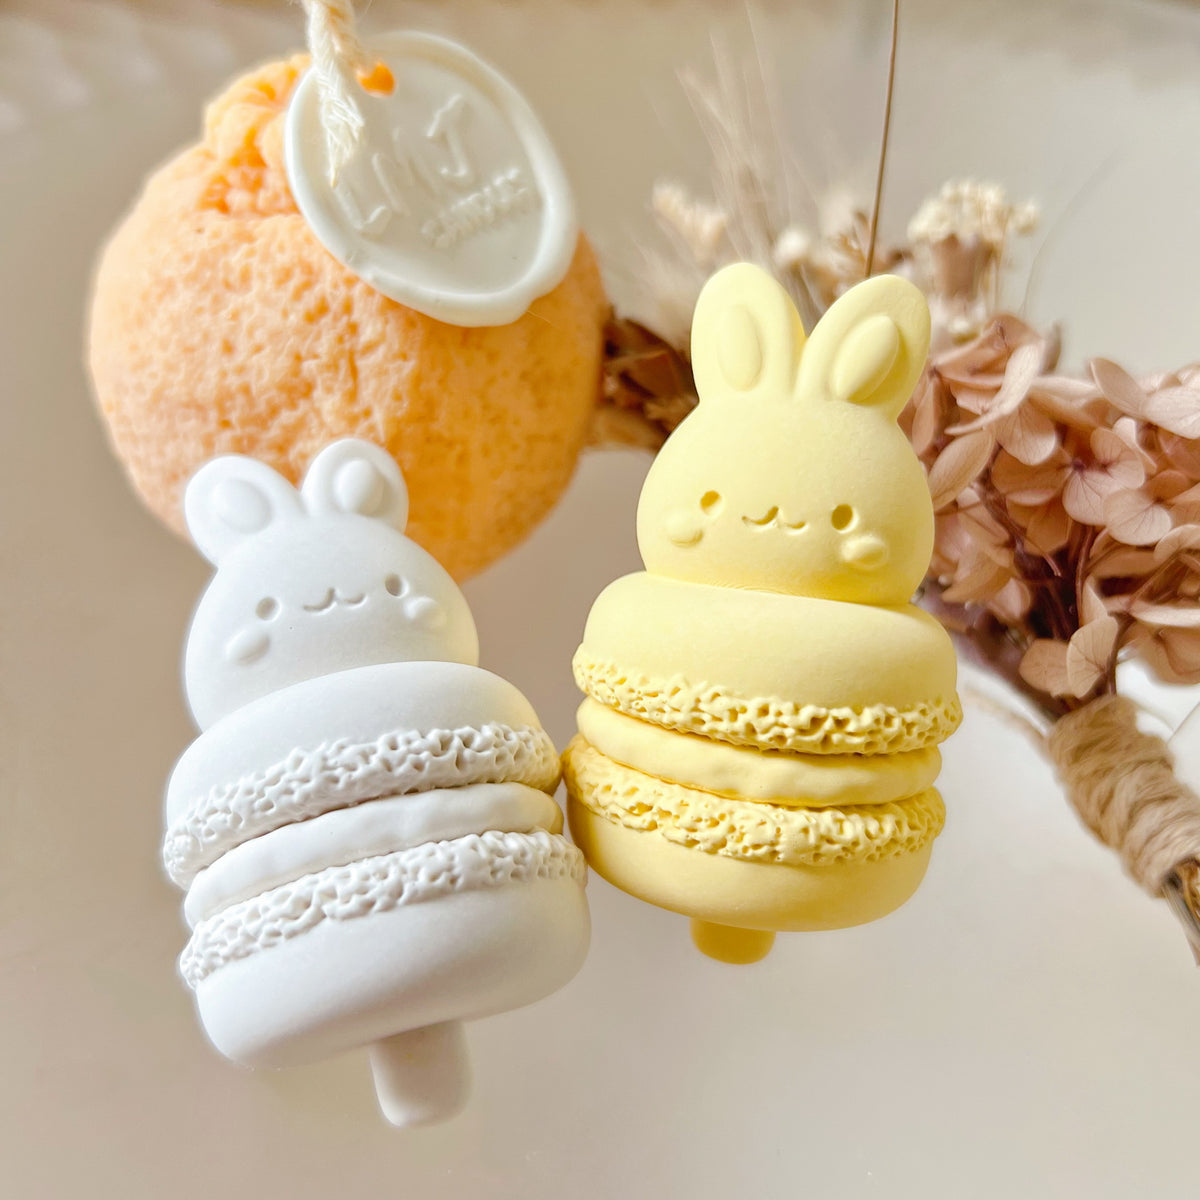 Macaron Bunny Car Air Freshener, LMJ Candles offers a range of handmade scented air fresheners, featuring car vent clips, hanging diffusers, scented fridge magnets, aroma stone diffusers and decorative artworks.